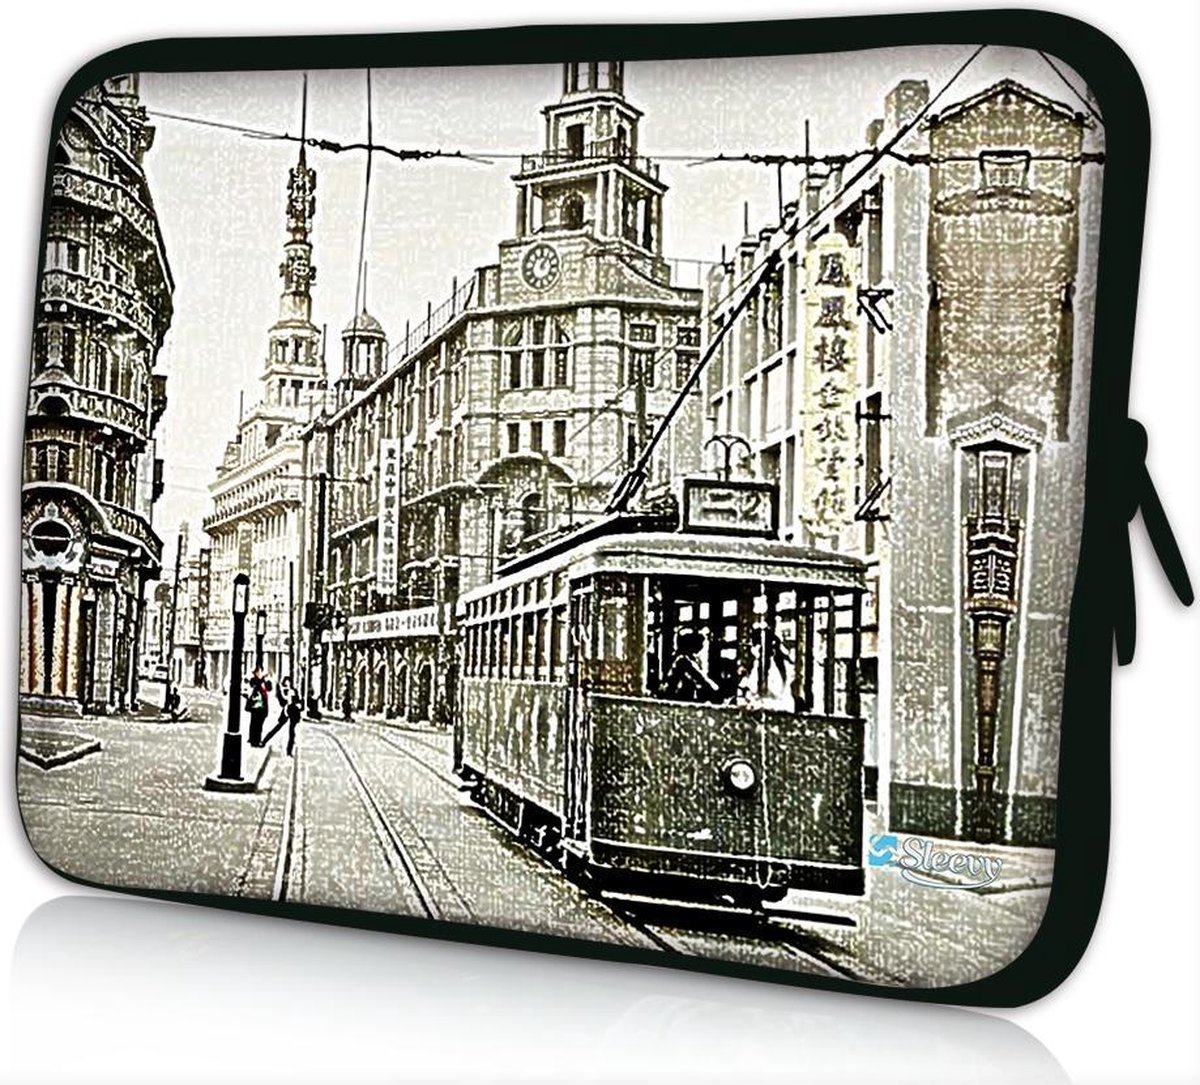 Sleevy 11.6 laptophoes Chinatown - laptop sleeve - Sleevy collectie 300+ designs